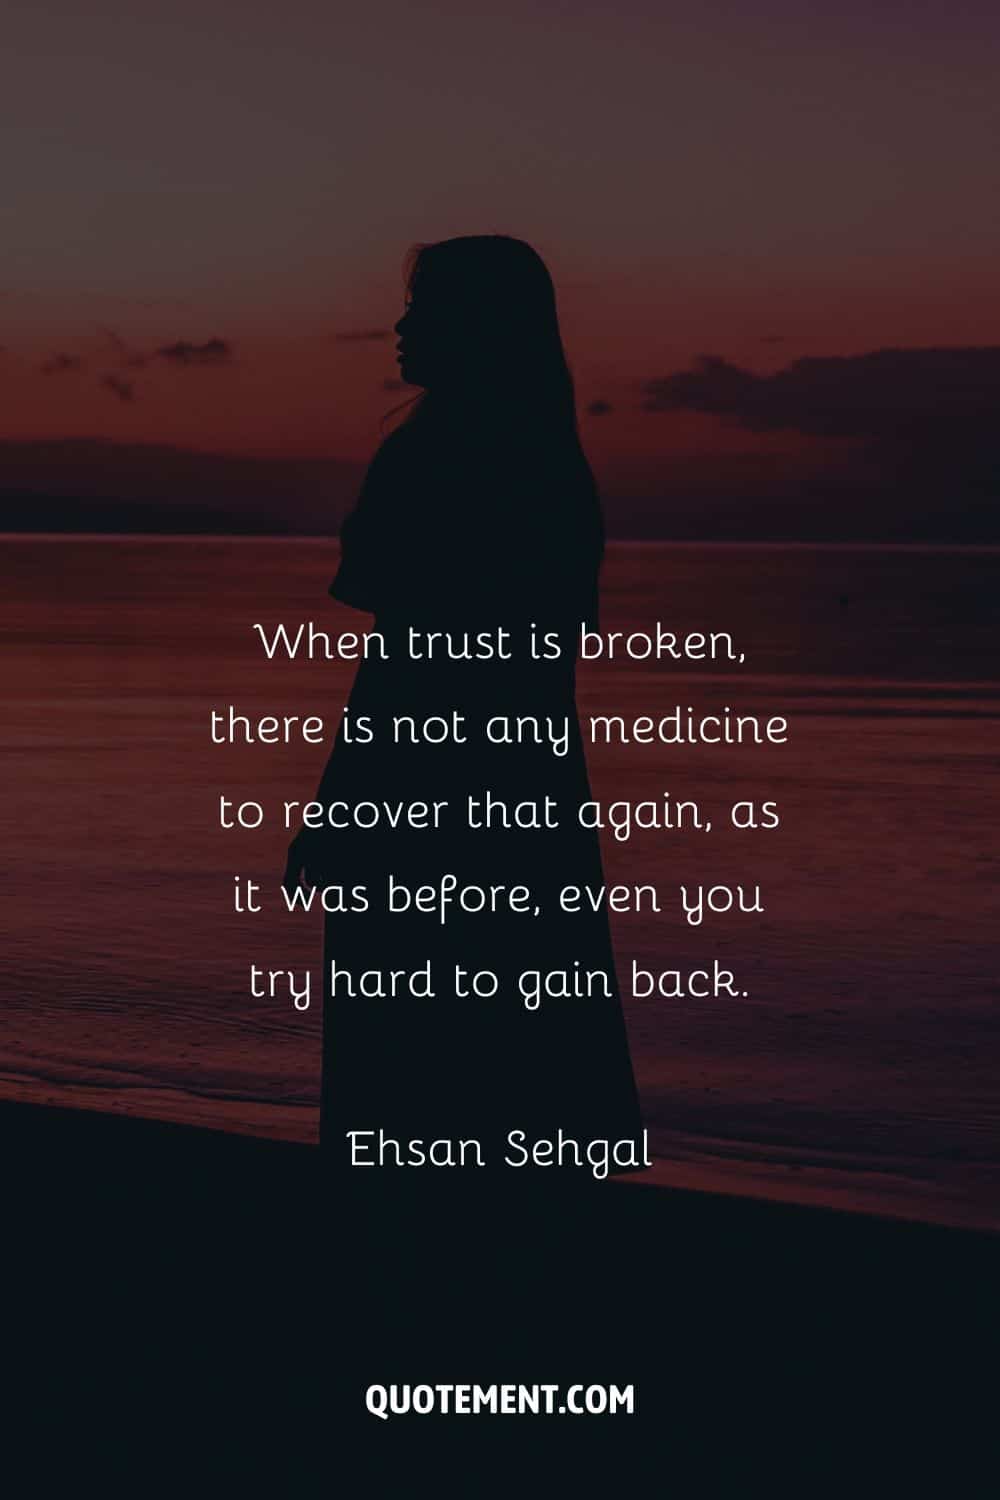 “When trust is broken, there is not any medicine to recover that again, as it was before, even you try hard to gain back” — Ehsan Sehgal